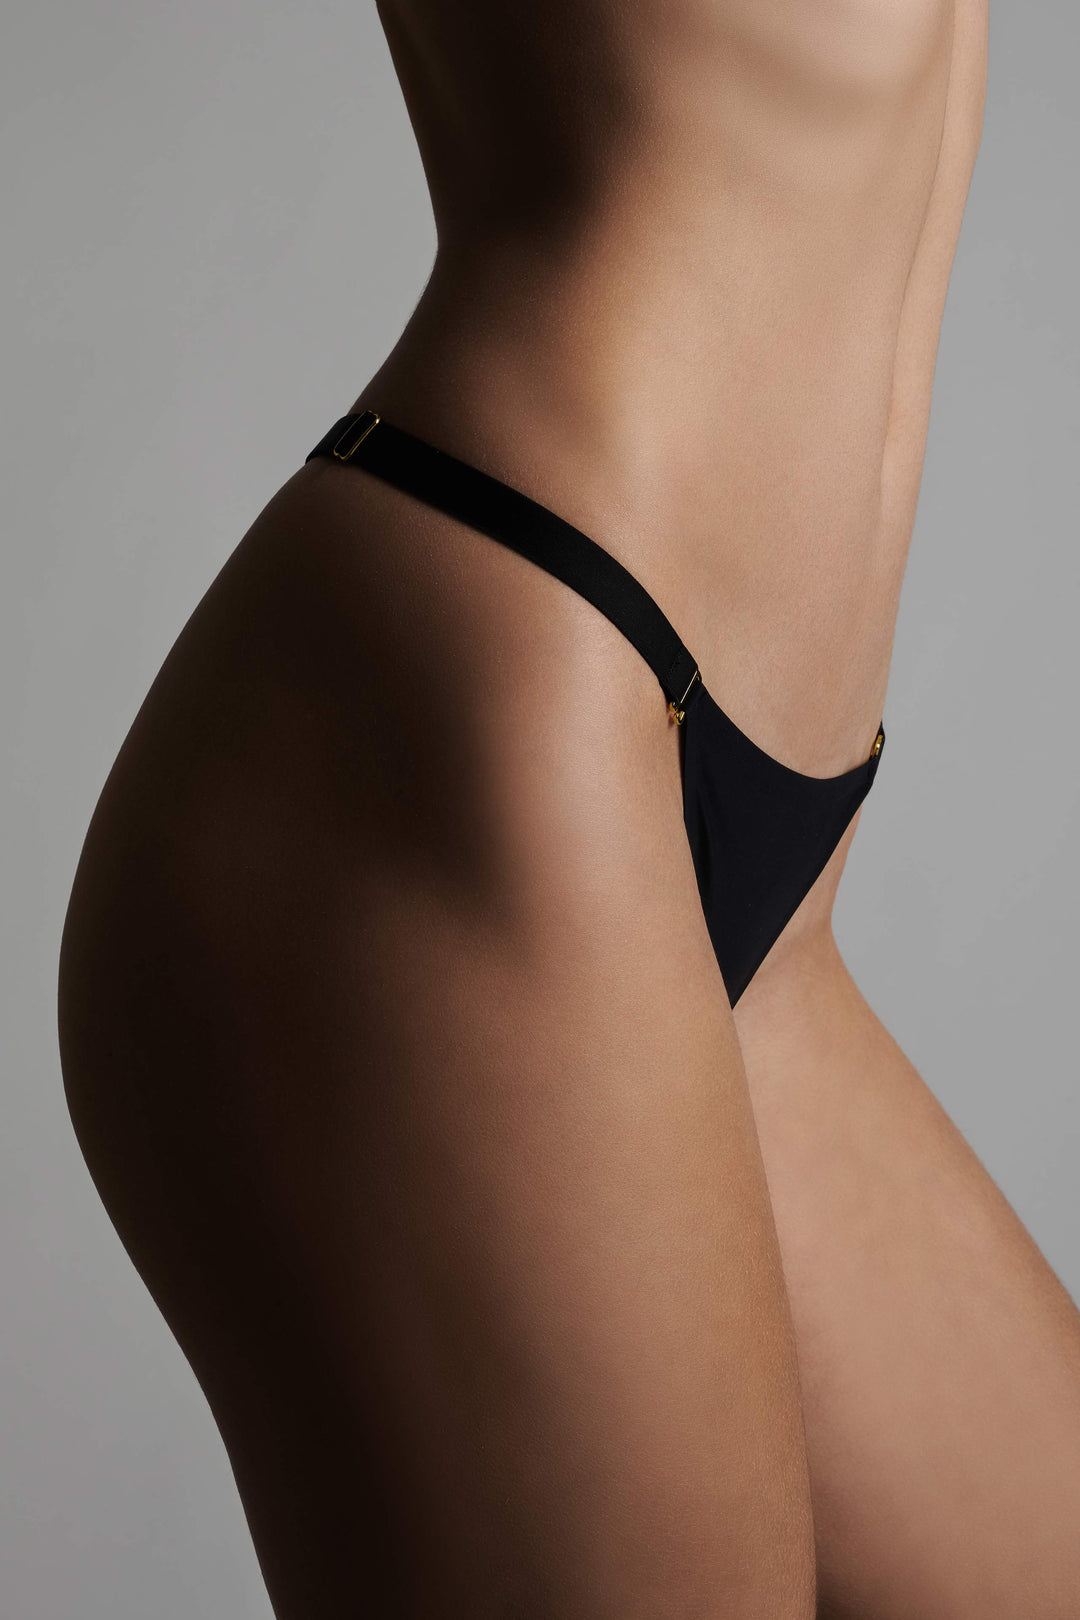 Tapage Nocturne Mini Thong – Workingirls Lingerie